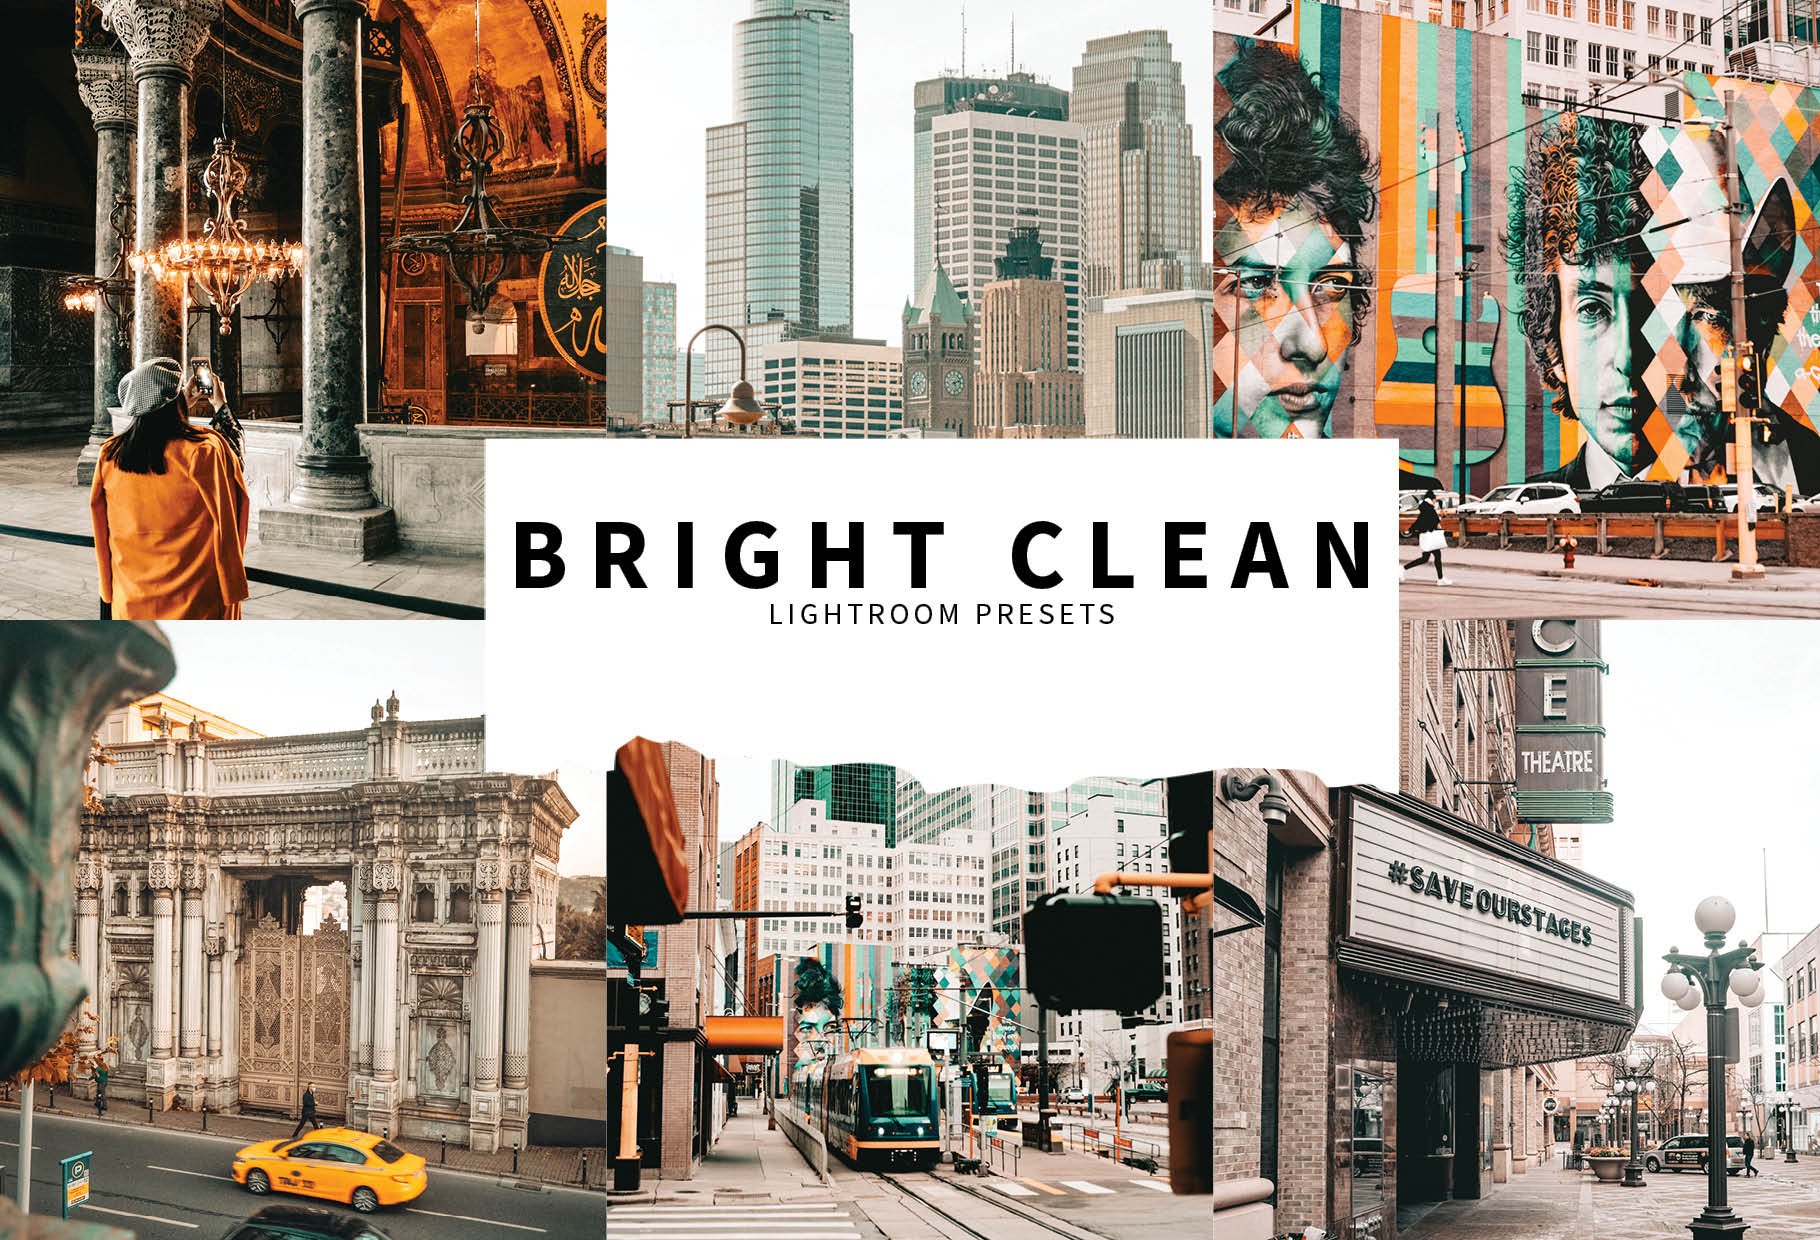 10 Bright Clean Lightroom Presetscover image.